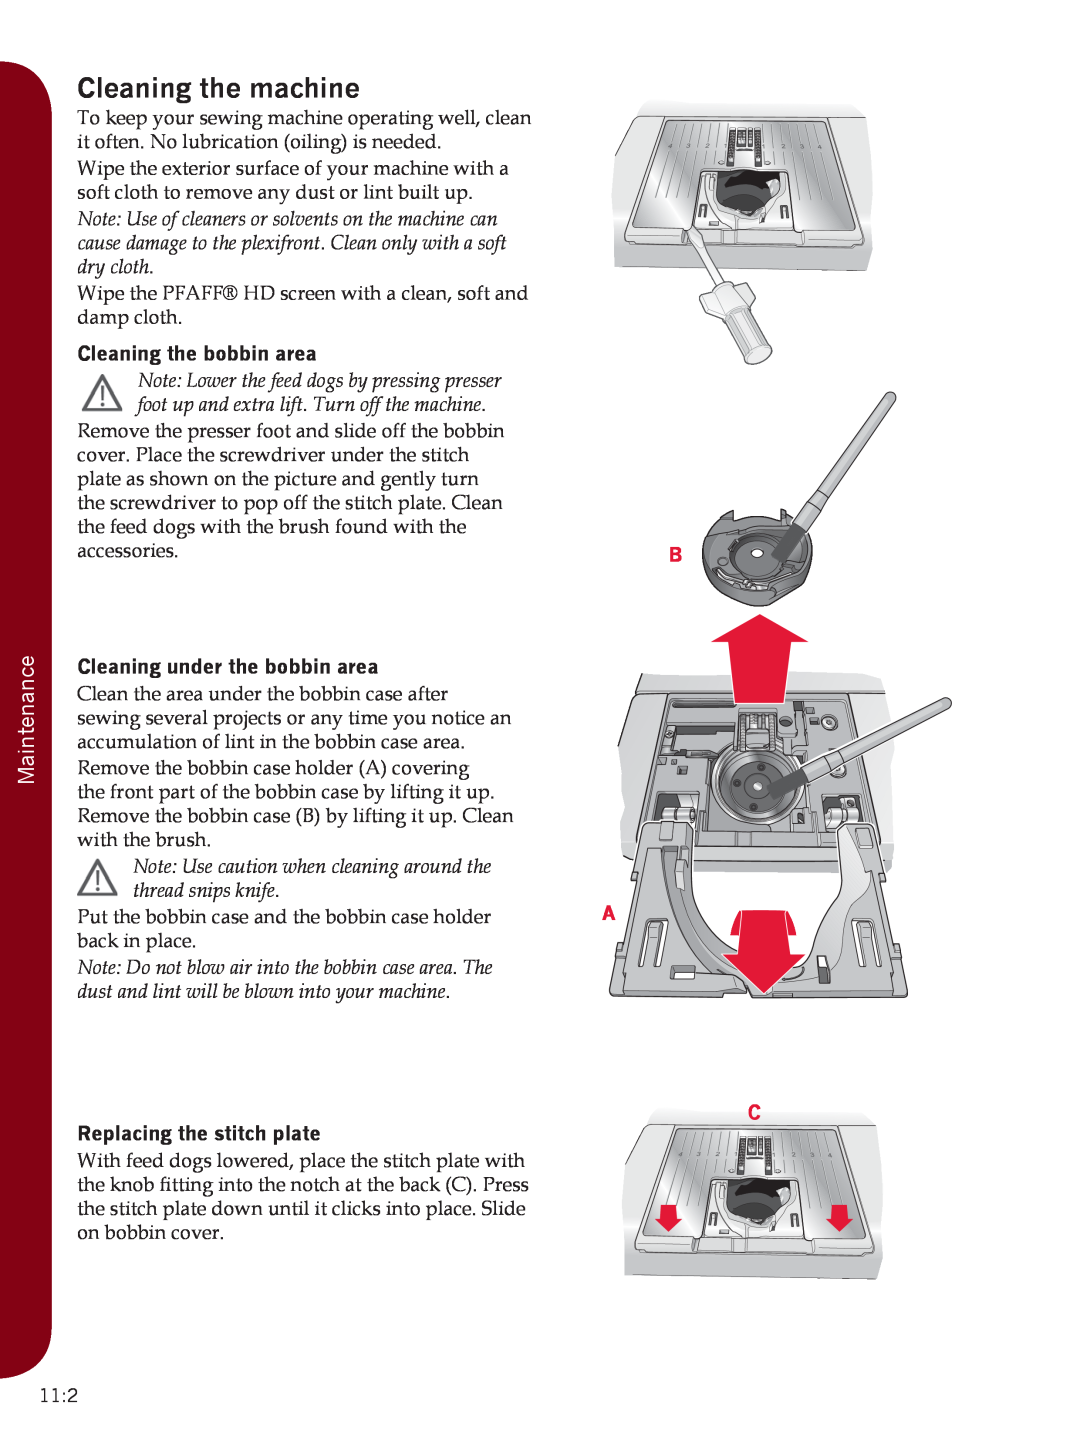 Pfaff Sewing Machine manual Cleaning the machine, Maintenance, Cleaning the bobbin area, Cleaning under the bobbin area 